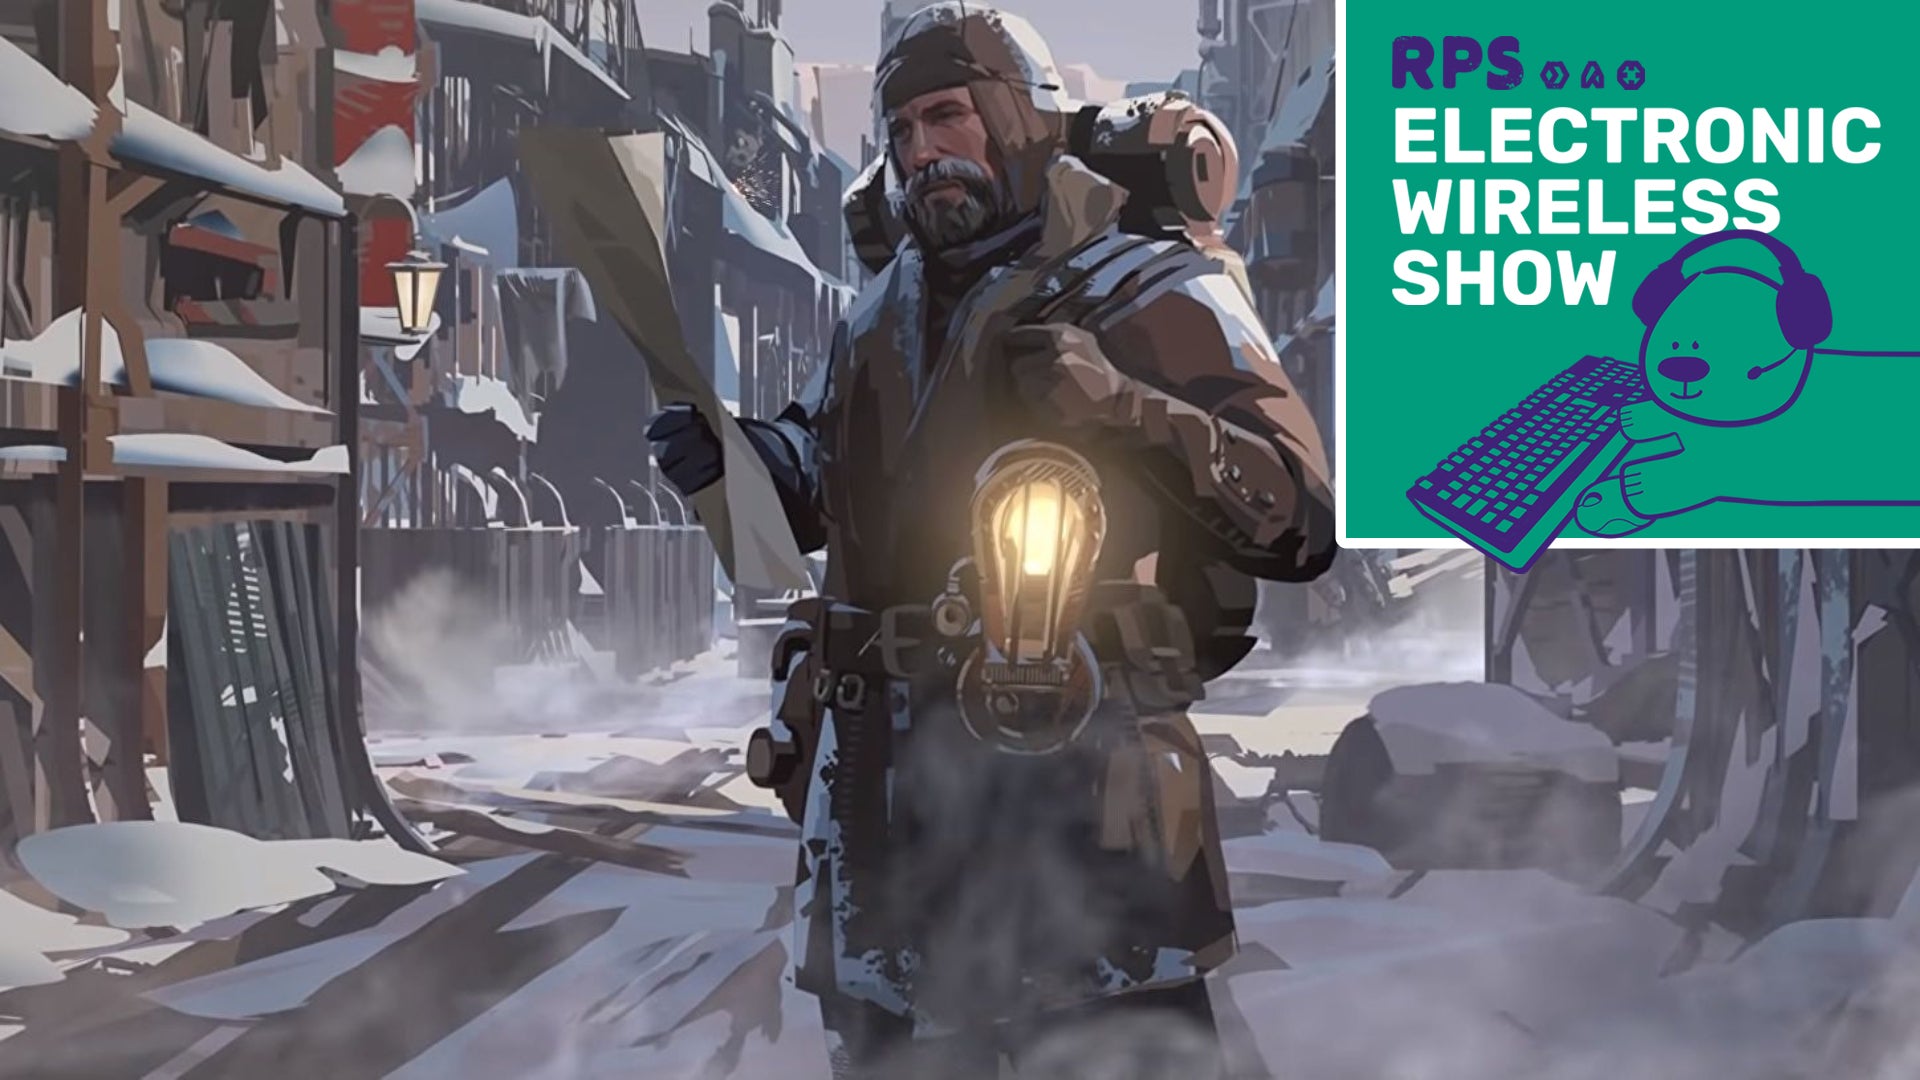 A screenshot of art for Frostpunk showing a man, heavily wrapped up against the cold, standing in a snowy street and holding a lantern. The Electronic Wireless Show Podcast is superimposed on the top right of the image.